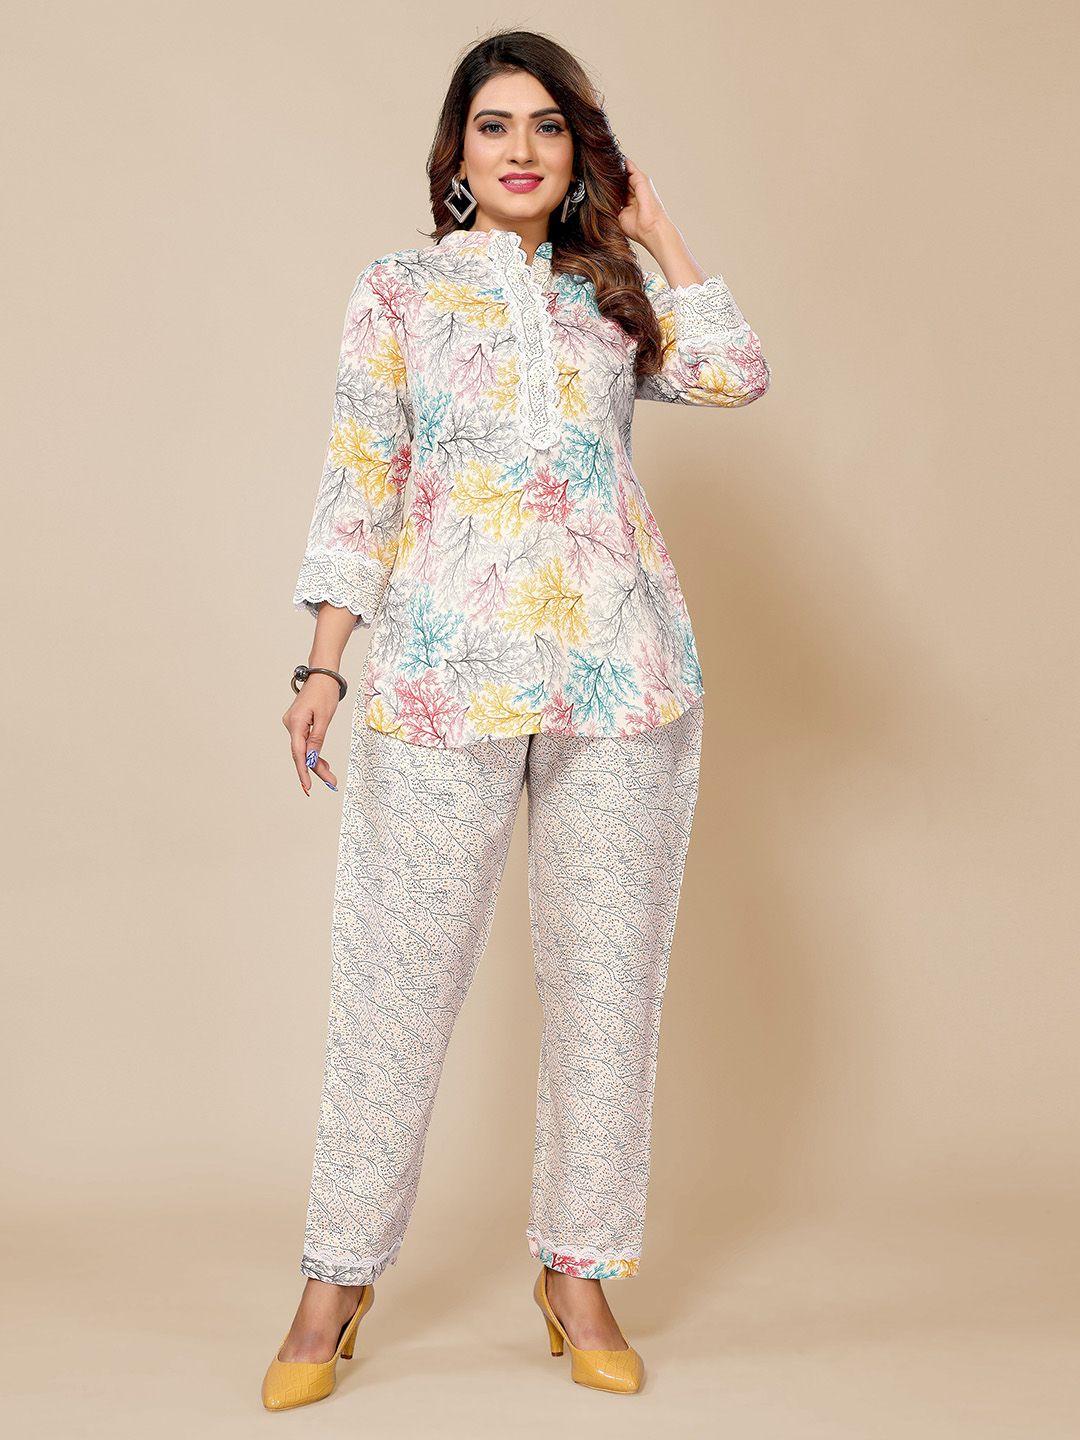 krimmple floral printed mandarin collar top with trousers  co-ords set